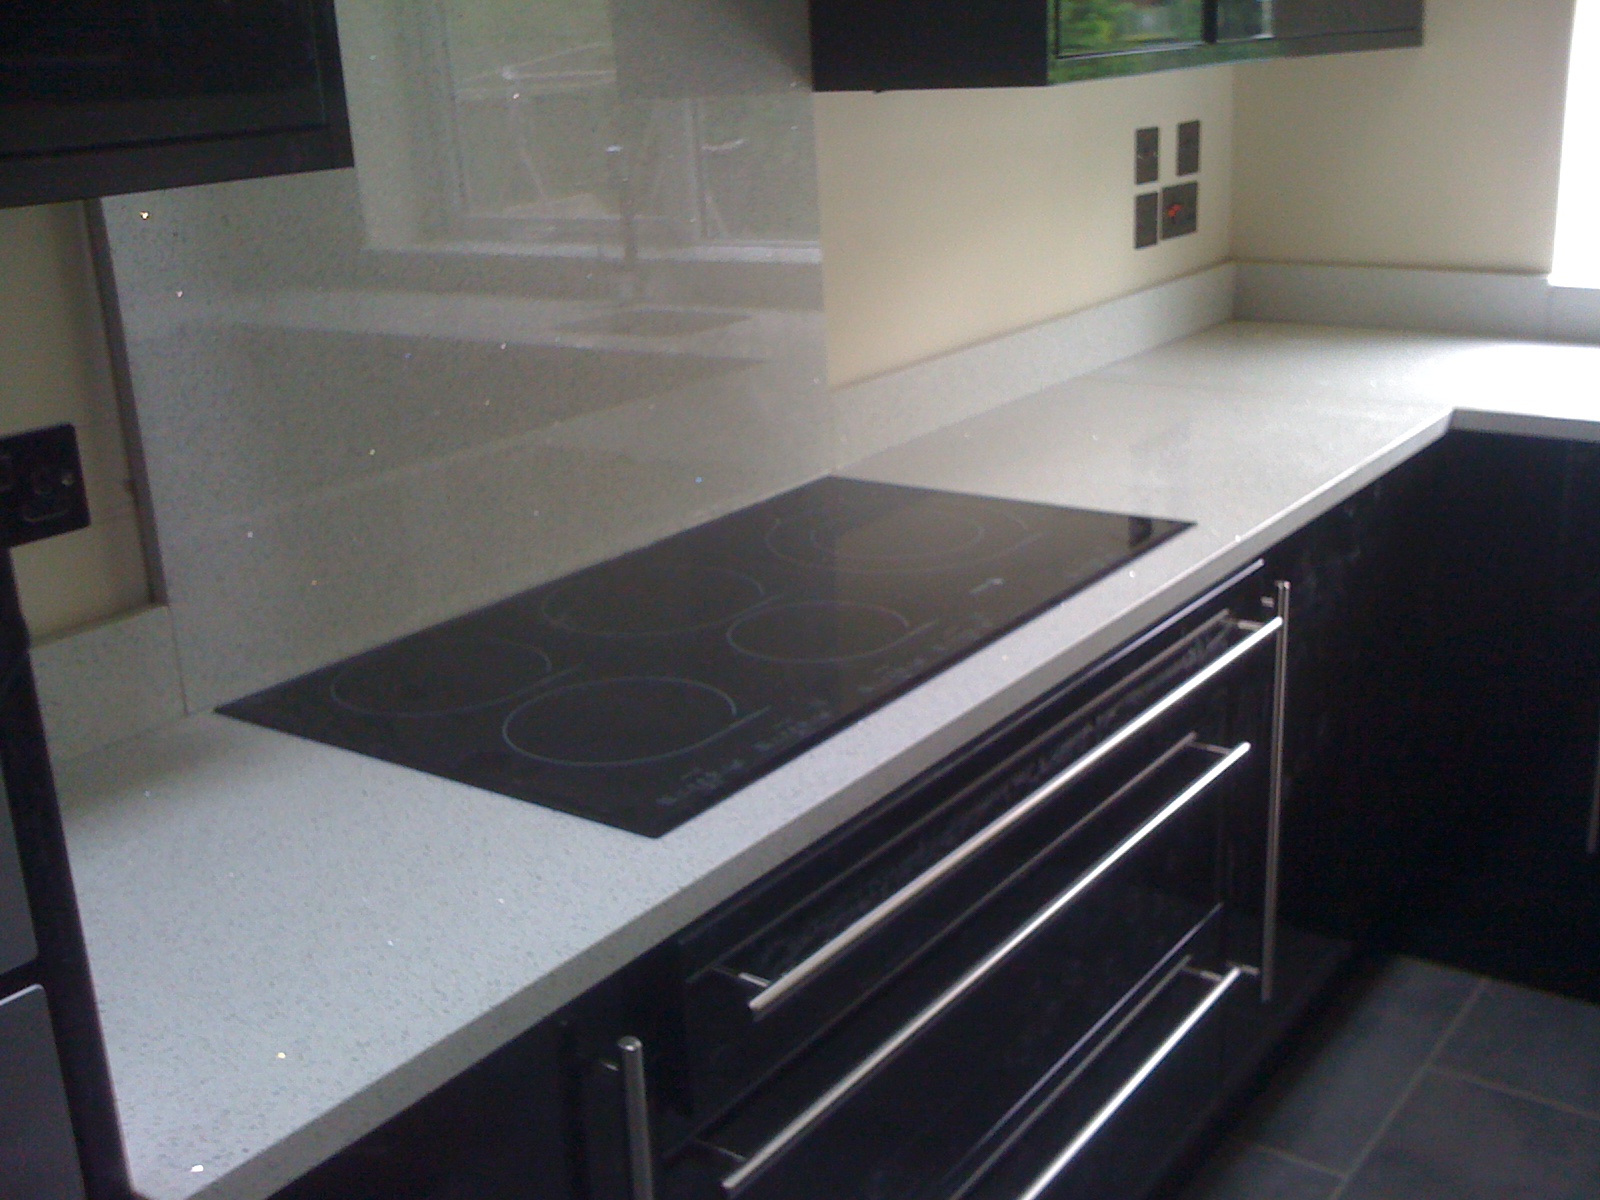 We supply Granite and Quartz Worktops in the lancashire Area. We supply Granite and Quartz Worktops in the Accrington Area. We supply Granite and Quartz Worktops in the Bacup Area. We supply Granite and Quartz Worktops in the Burnley Area. We supply Granite and Quartz Worktops in the Chorley Area. We supply Granite and Quartz Worktops in the Clitheroe Area. We supply Granite and Quartz Worktops in the Fleetwood Area. We supply Granite and Quartz Worktops in the Great-Harwood Area. We supply Granite and Quartz Worktops in the Haslingden Area. We supply Granite and Quartz Worktops in the Lancaster Area. We supply Granite and Quartz Worktops in the Leyland Area. We supply Granite and Quartz Worktops in the Lytham-Saint-Annes Area. We supply Granite and Quartz Worktops in the Morecambe Area. We supply Granite and Quartz Worktops in the Nelson Area. We supply Granite and Quartz Worktops in the Ormskirk Area. We supply Granite and Quartz Worktops in the Padiham Area. We supply Granite and Quartz Worktops in the Poulton-le-Fylde Area. We supply Granite and Quartz Worktops in the Preston Area. We supply Granite and Quartz Worktops in the Rawtenstall Area. We supply Granite and Quartz Worktops in the Skelmersdale Area. We supply Granite and Quartz Worktops in the Thornton-Cleveleys Area.